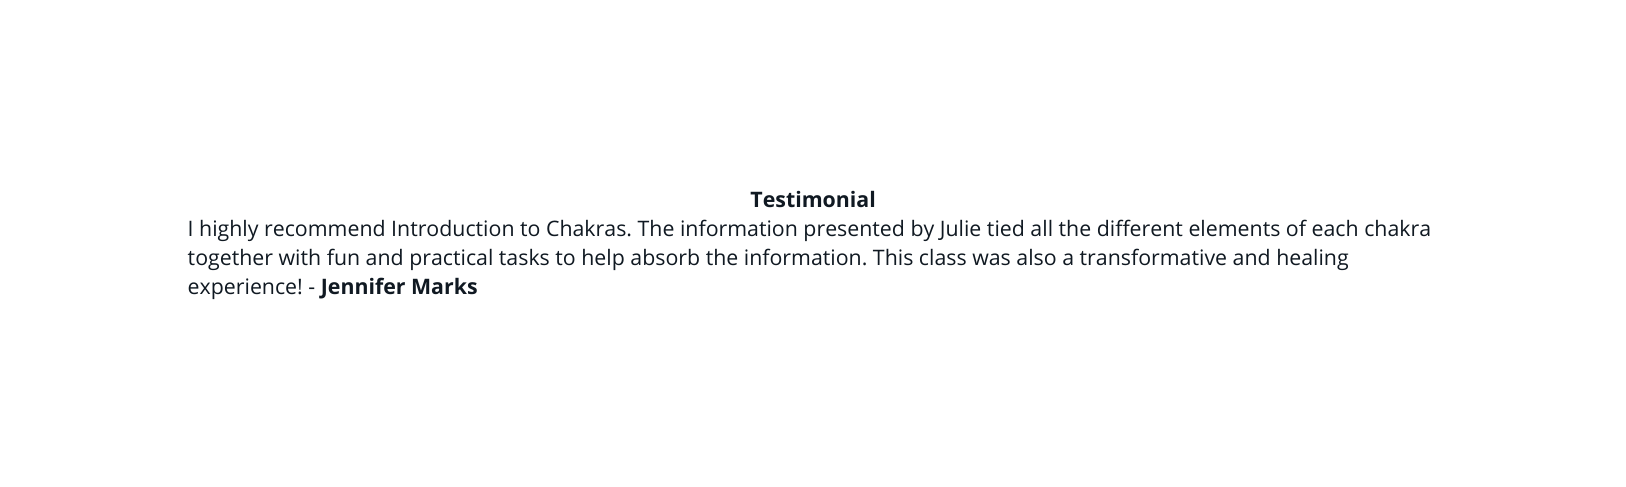 Testimonial I highly recommend Introduction to Chakras The information presented by Julie tied all the different elements of each chakra together with fun and practical tasks to help absorb the information This class was also a transformative and healing experience Jennifer Marks